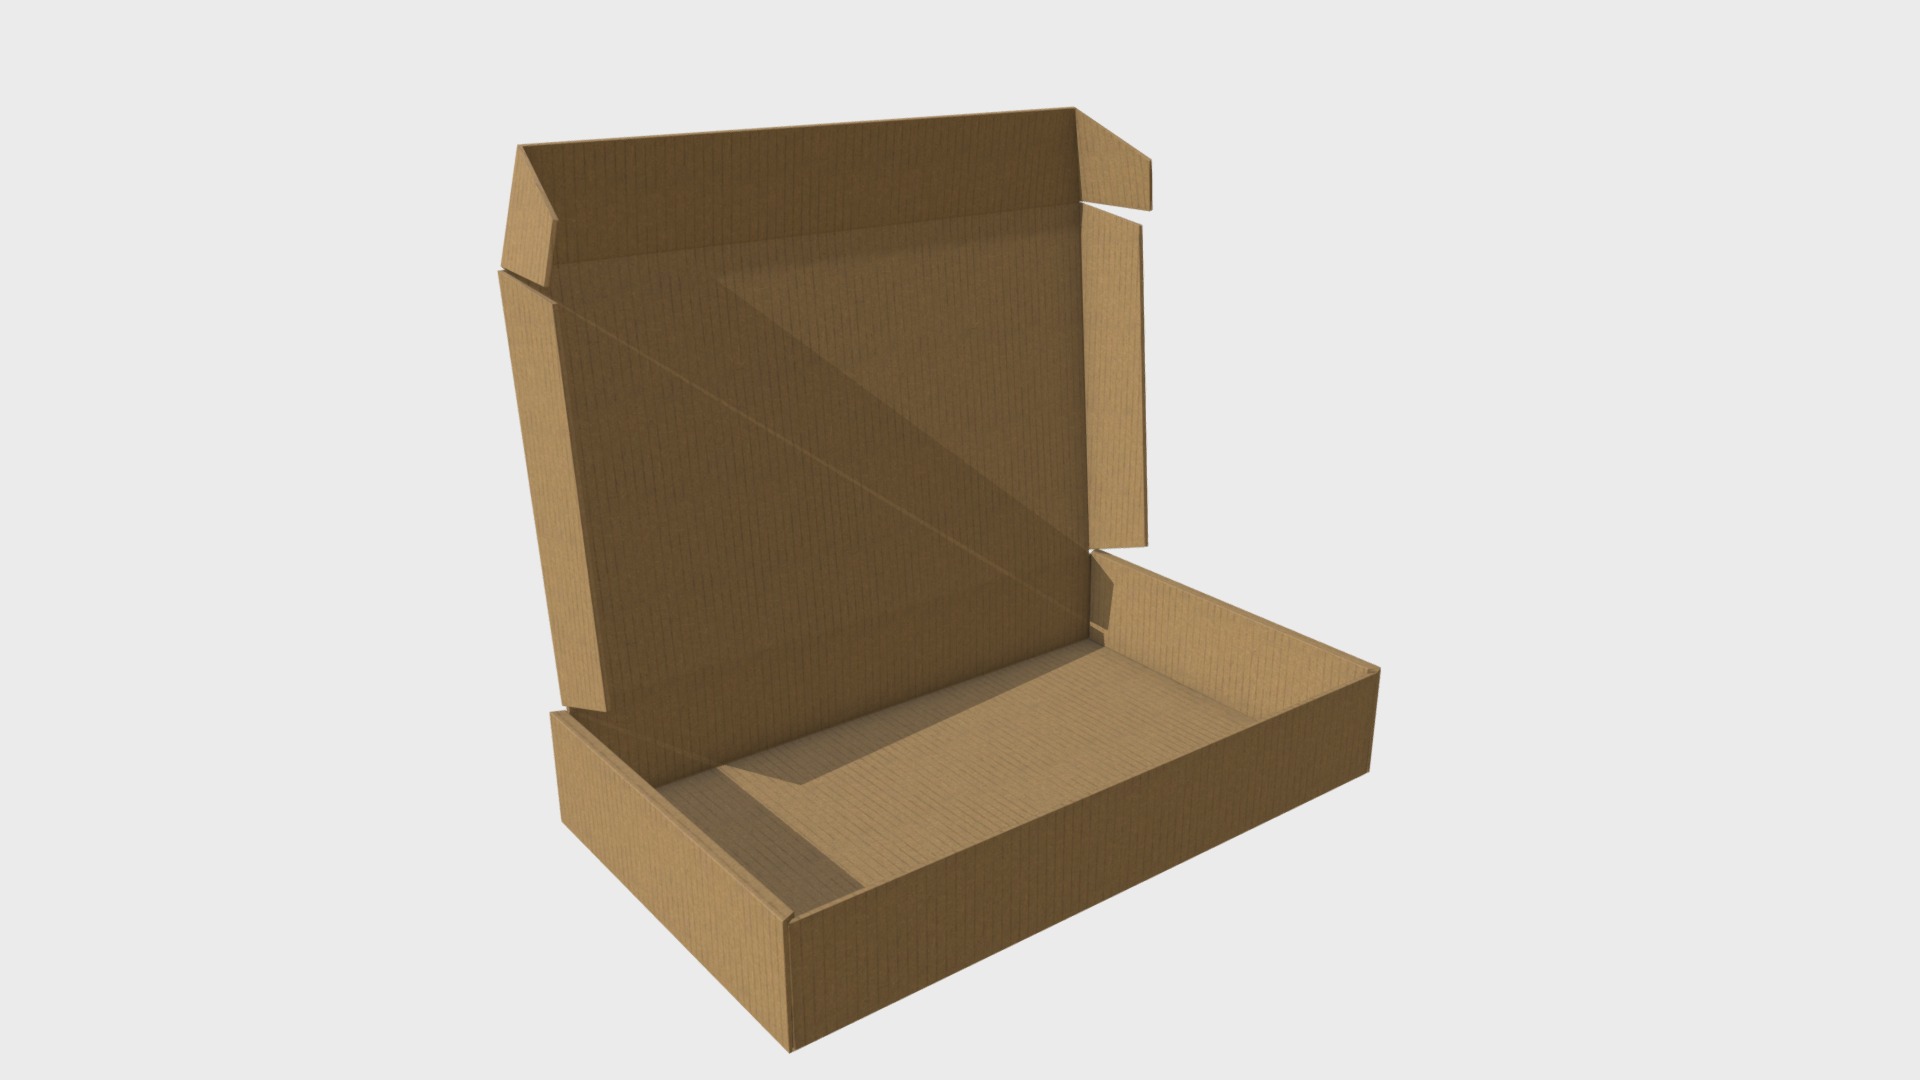 3D model Carton box open - This is a 3D model of the Carton box open. The 3D model is about a wooden box with a white background.